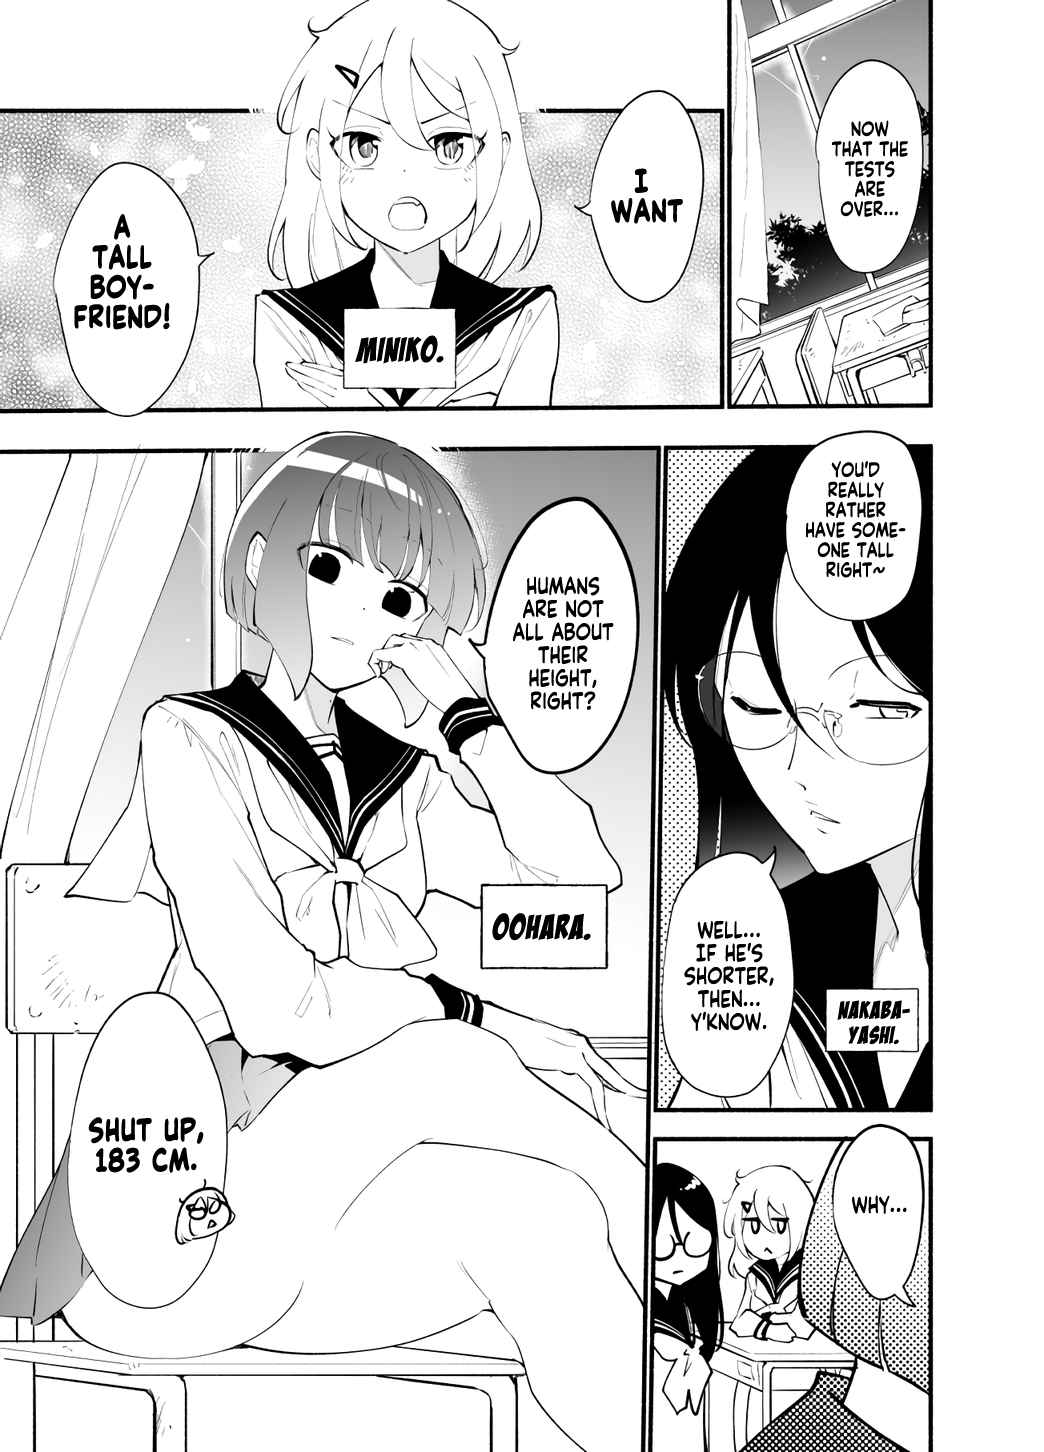 Until the Tall Kouhai (♀) and the Short Senpai (♂) Relationship Develops Into Romance Vol. 2 Ch. 12 The Ideal Height Tall Girls Look for in a Boyfriend